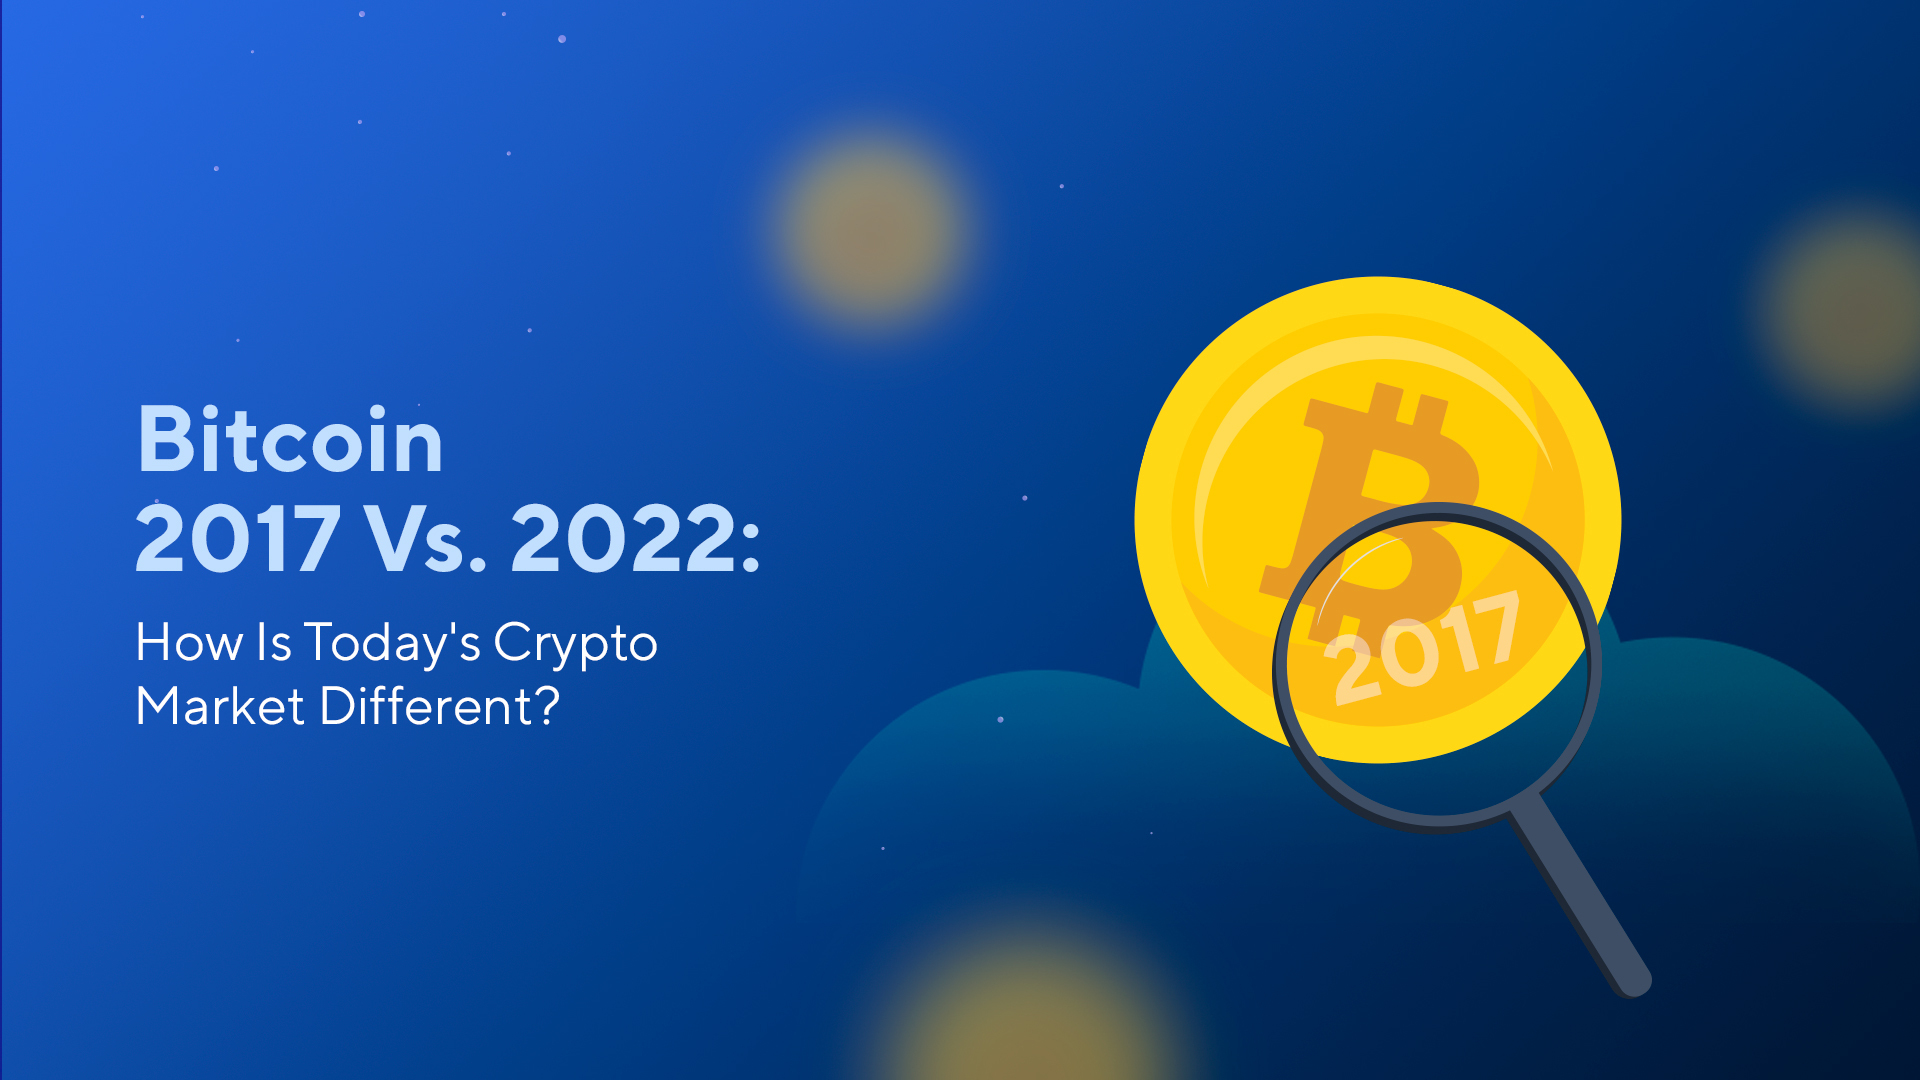 Bitcoin 2017 Vs. 2022: How Is Today’s Crypto Market Different?